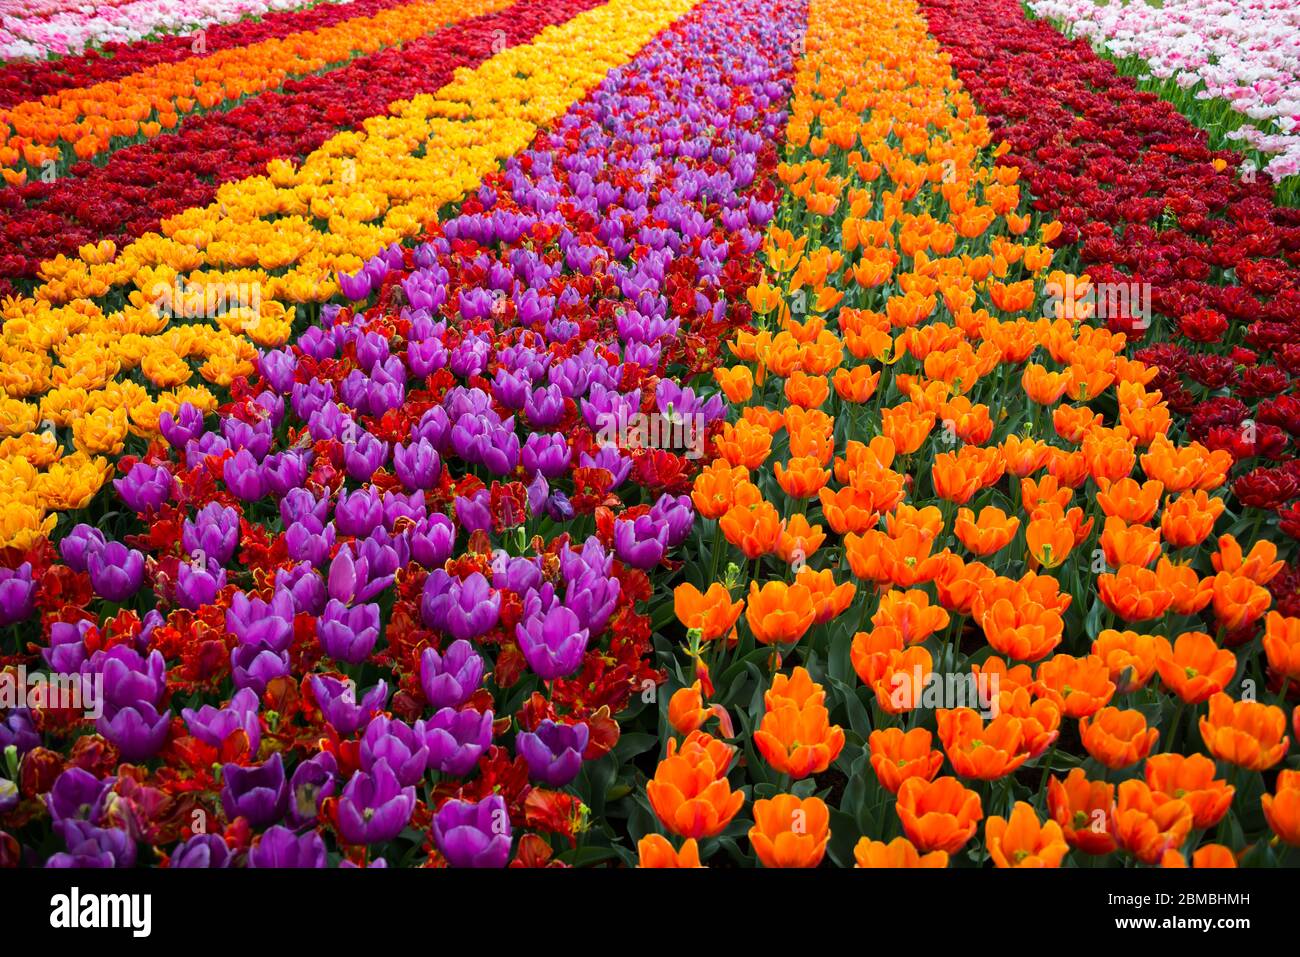 Beautiful tulips flowers blooming in a garden. Spring flowers in blossom Stock Photo